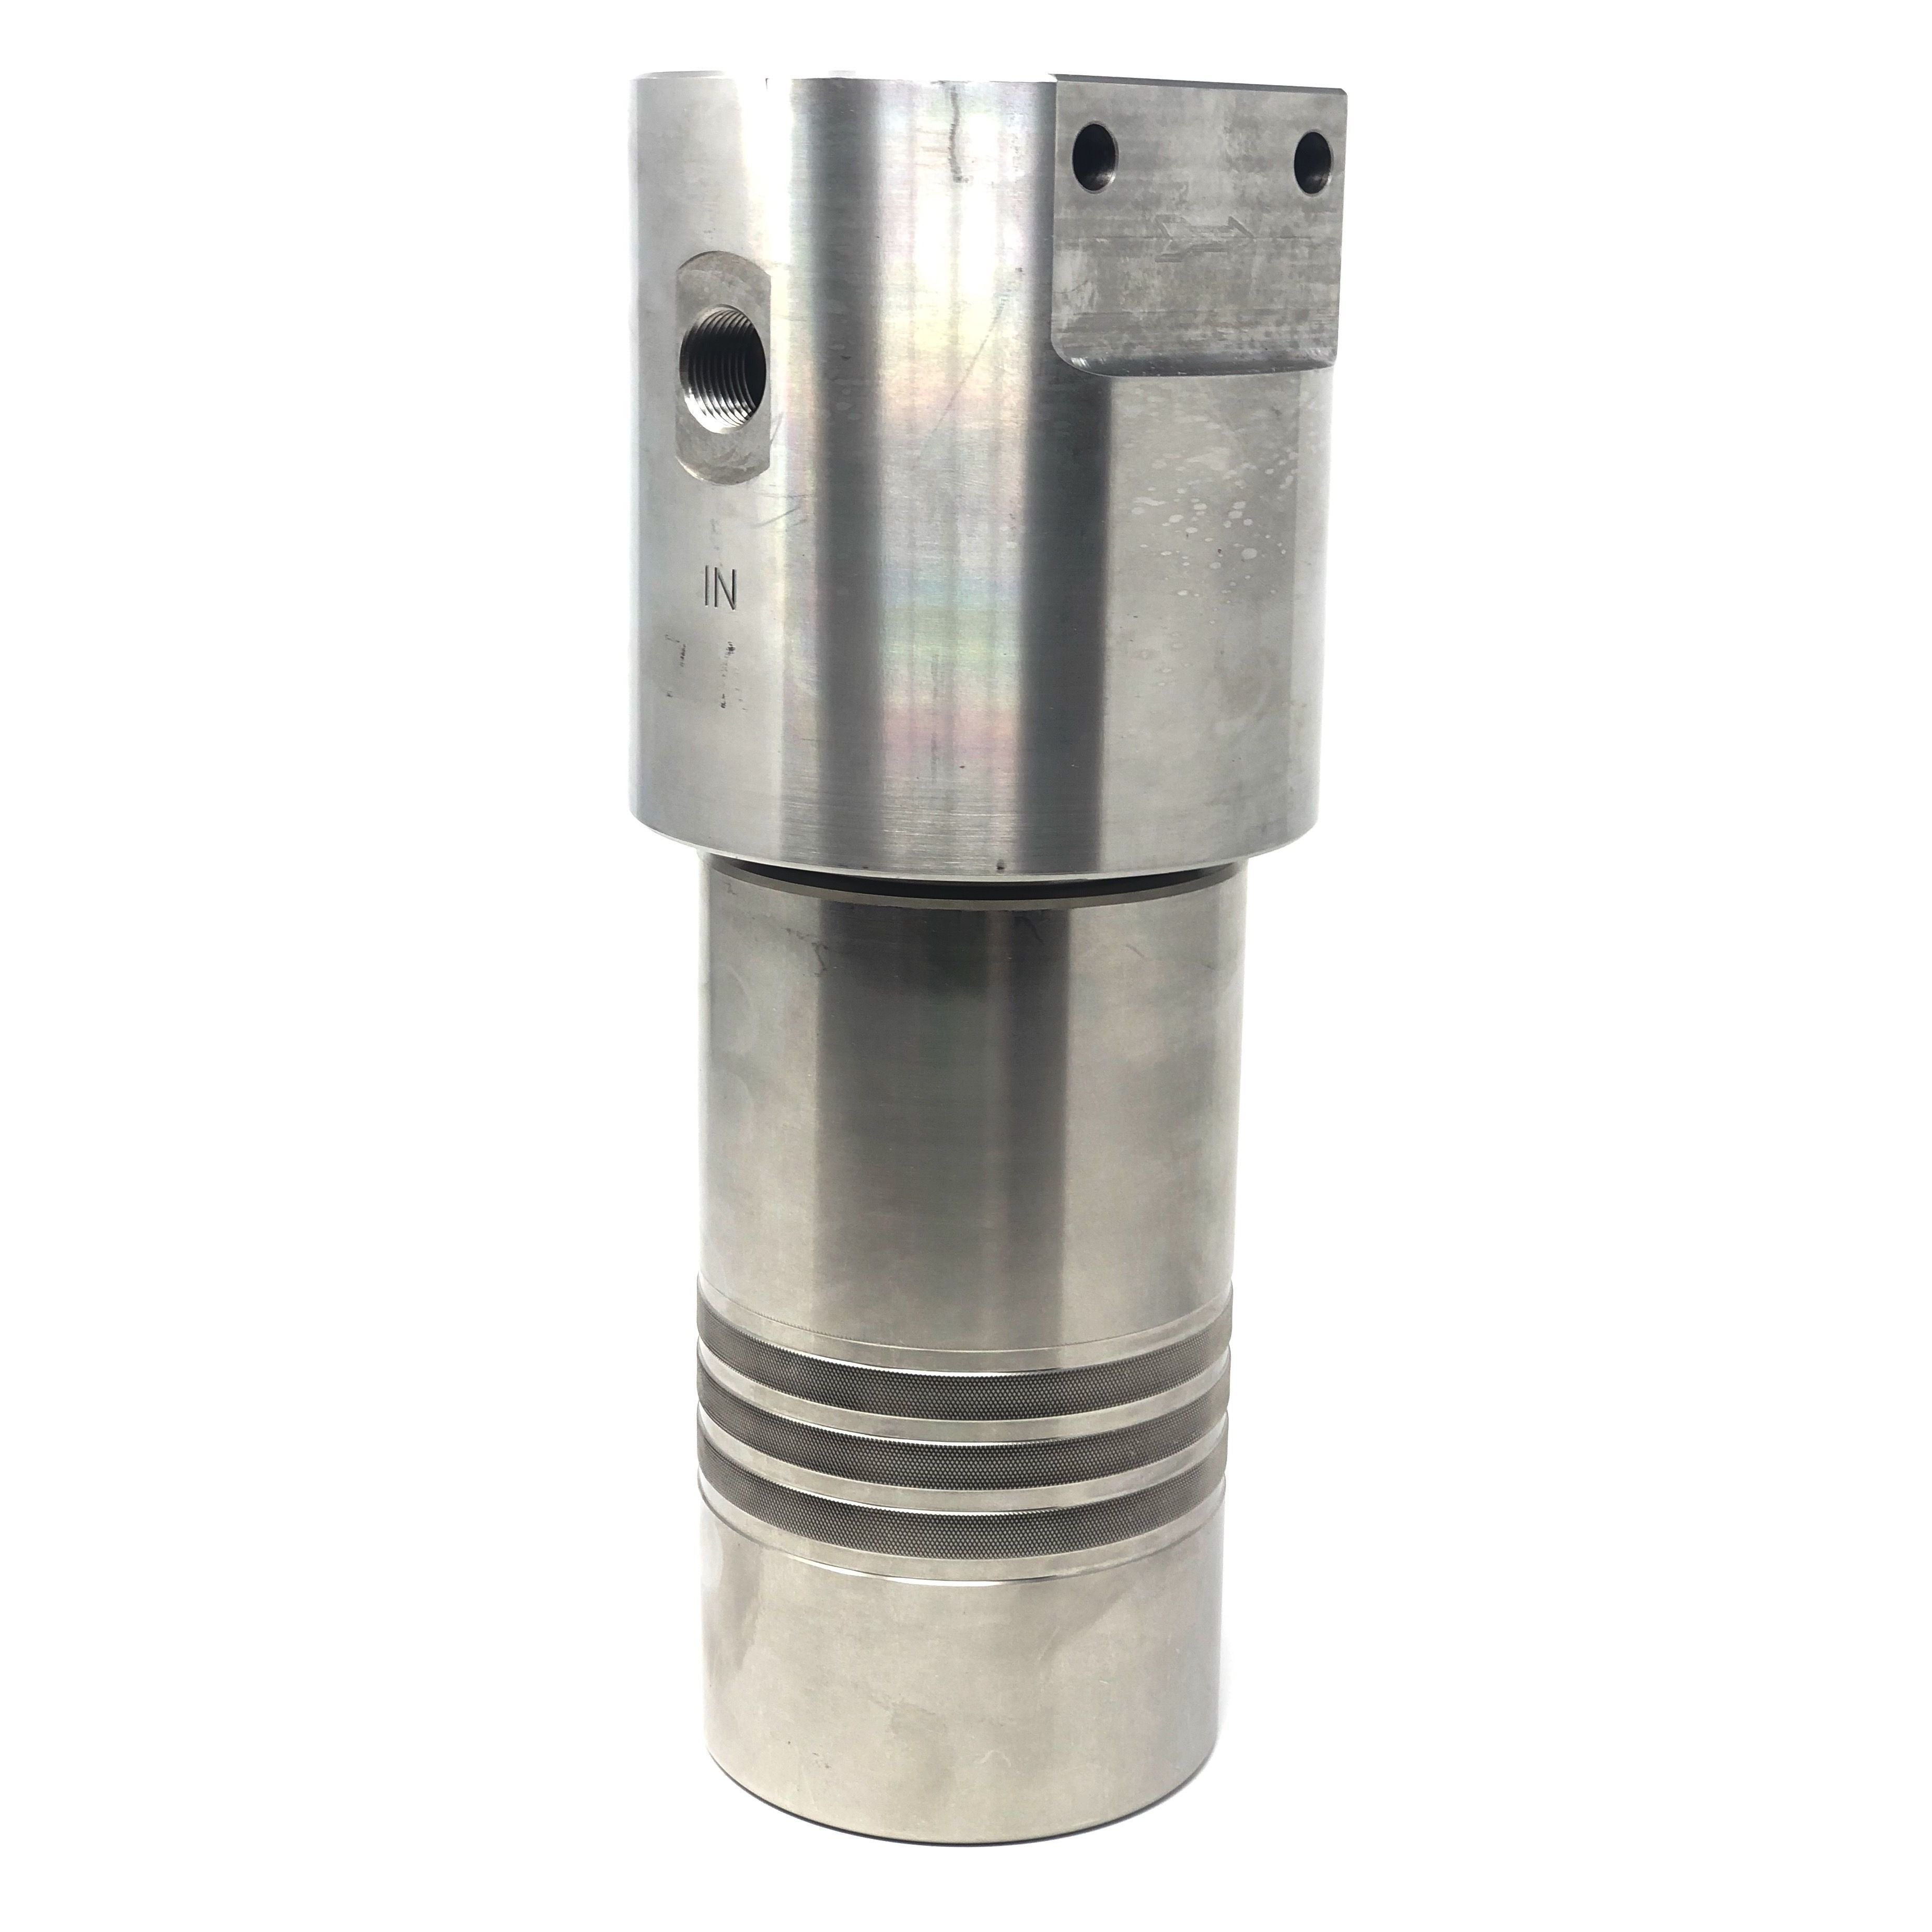 52S-244N-18SEN : Chase Ultra High Pressure Inline Filter, 10000psi, 1/4" NPT, 18 Micron, With Visual Indicator, No Bypass